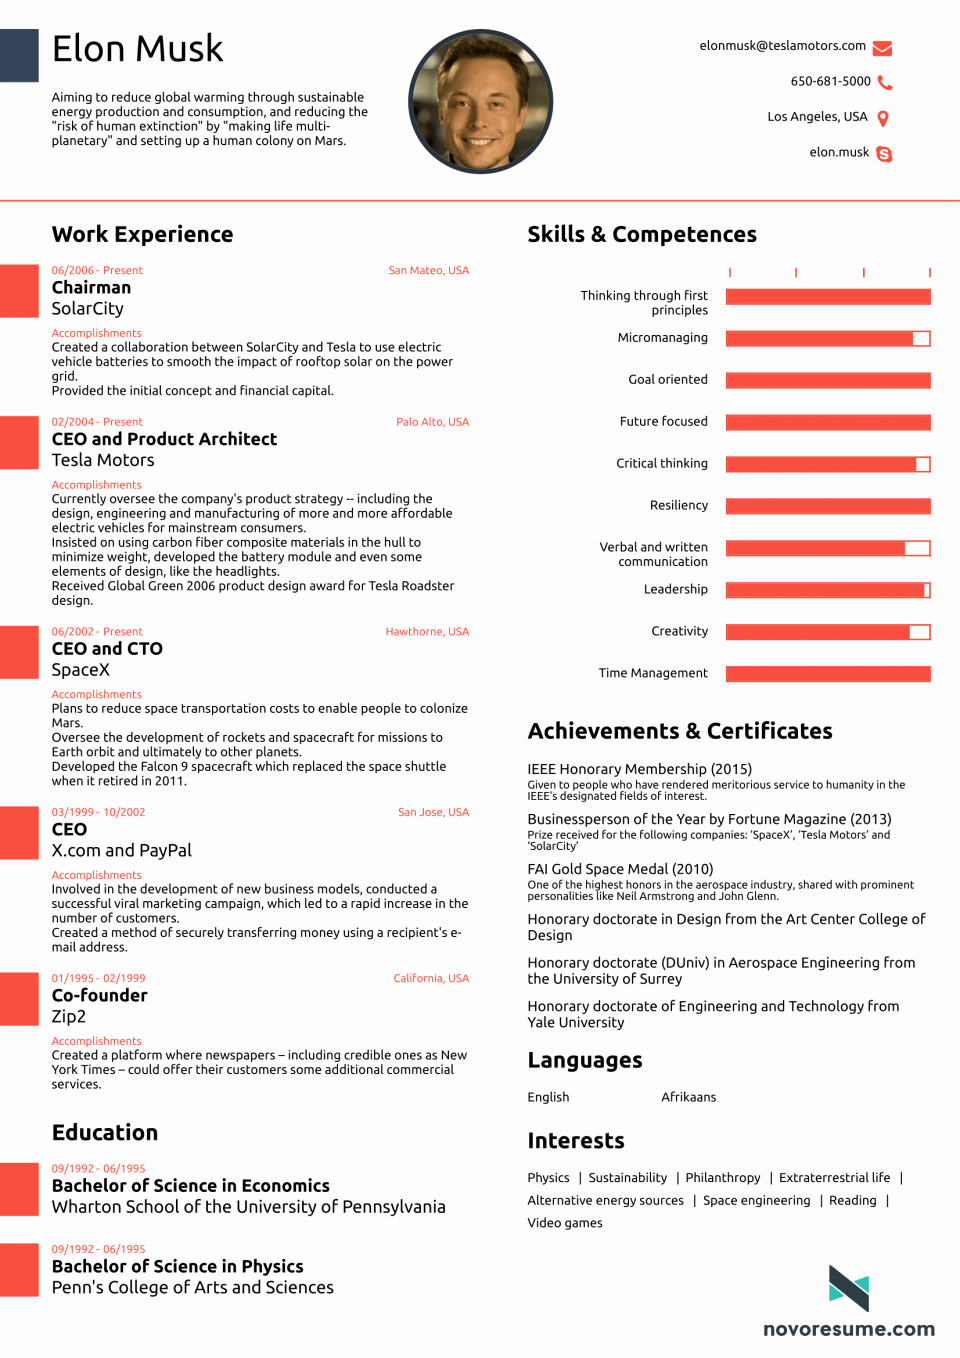 This Résumé for Elon Musk Proves You Never Ever Need to